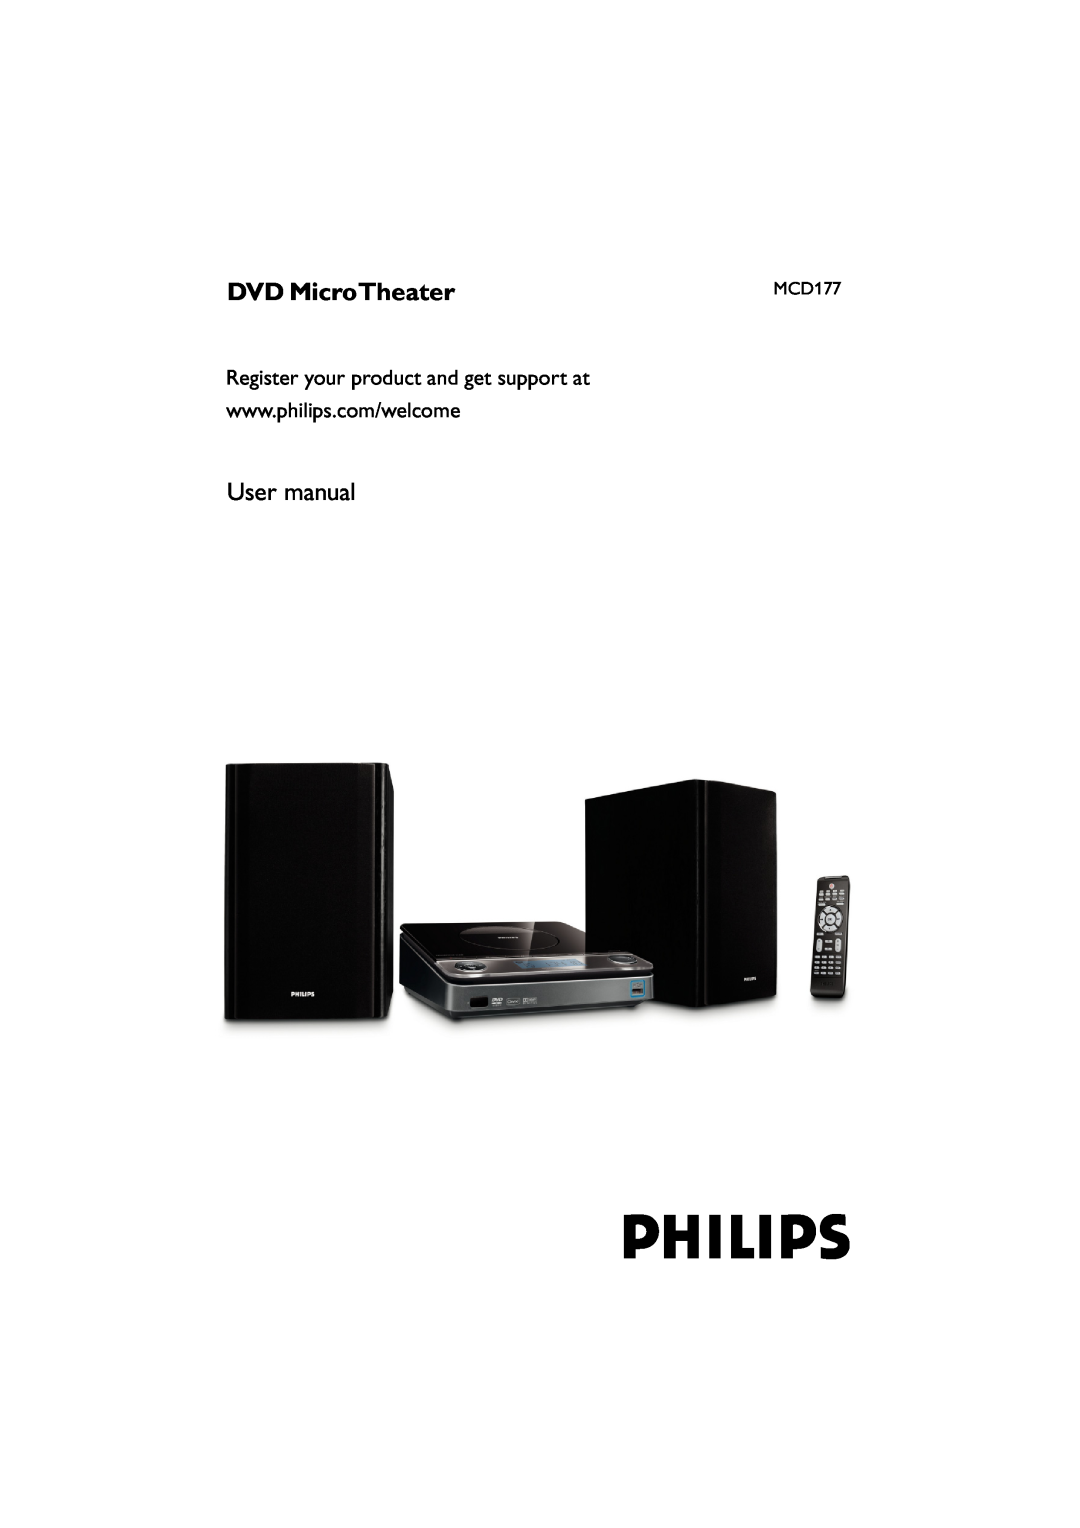 Philips PDCC-JH-0811 user manual DVD MicroTheater, User manual, Register your product and get support at, MCD177 